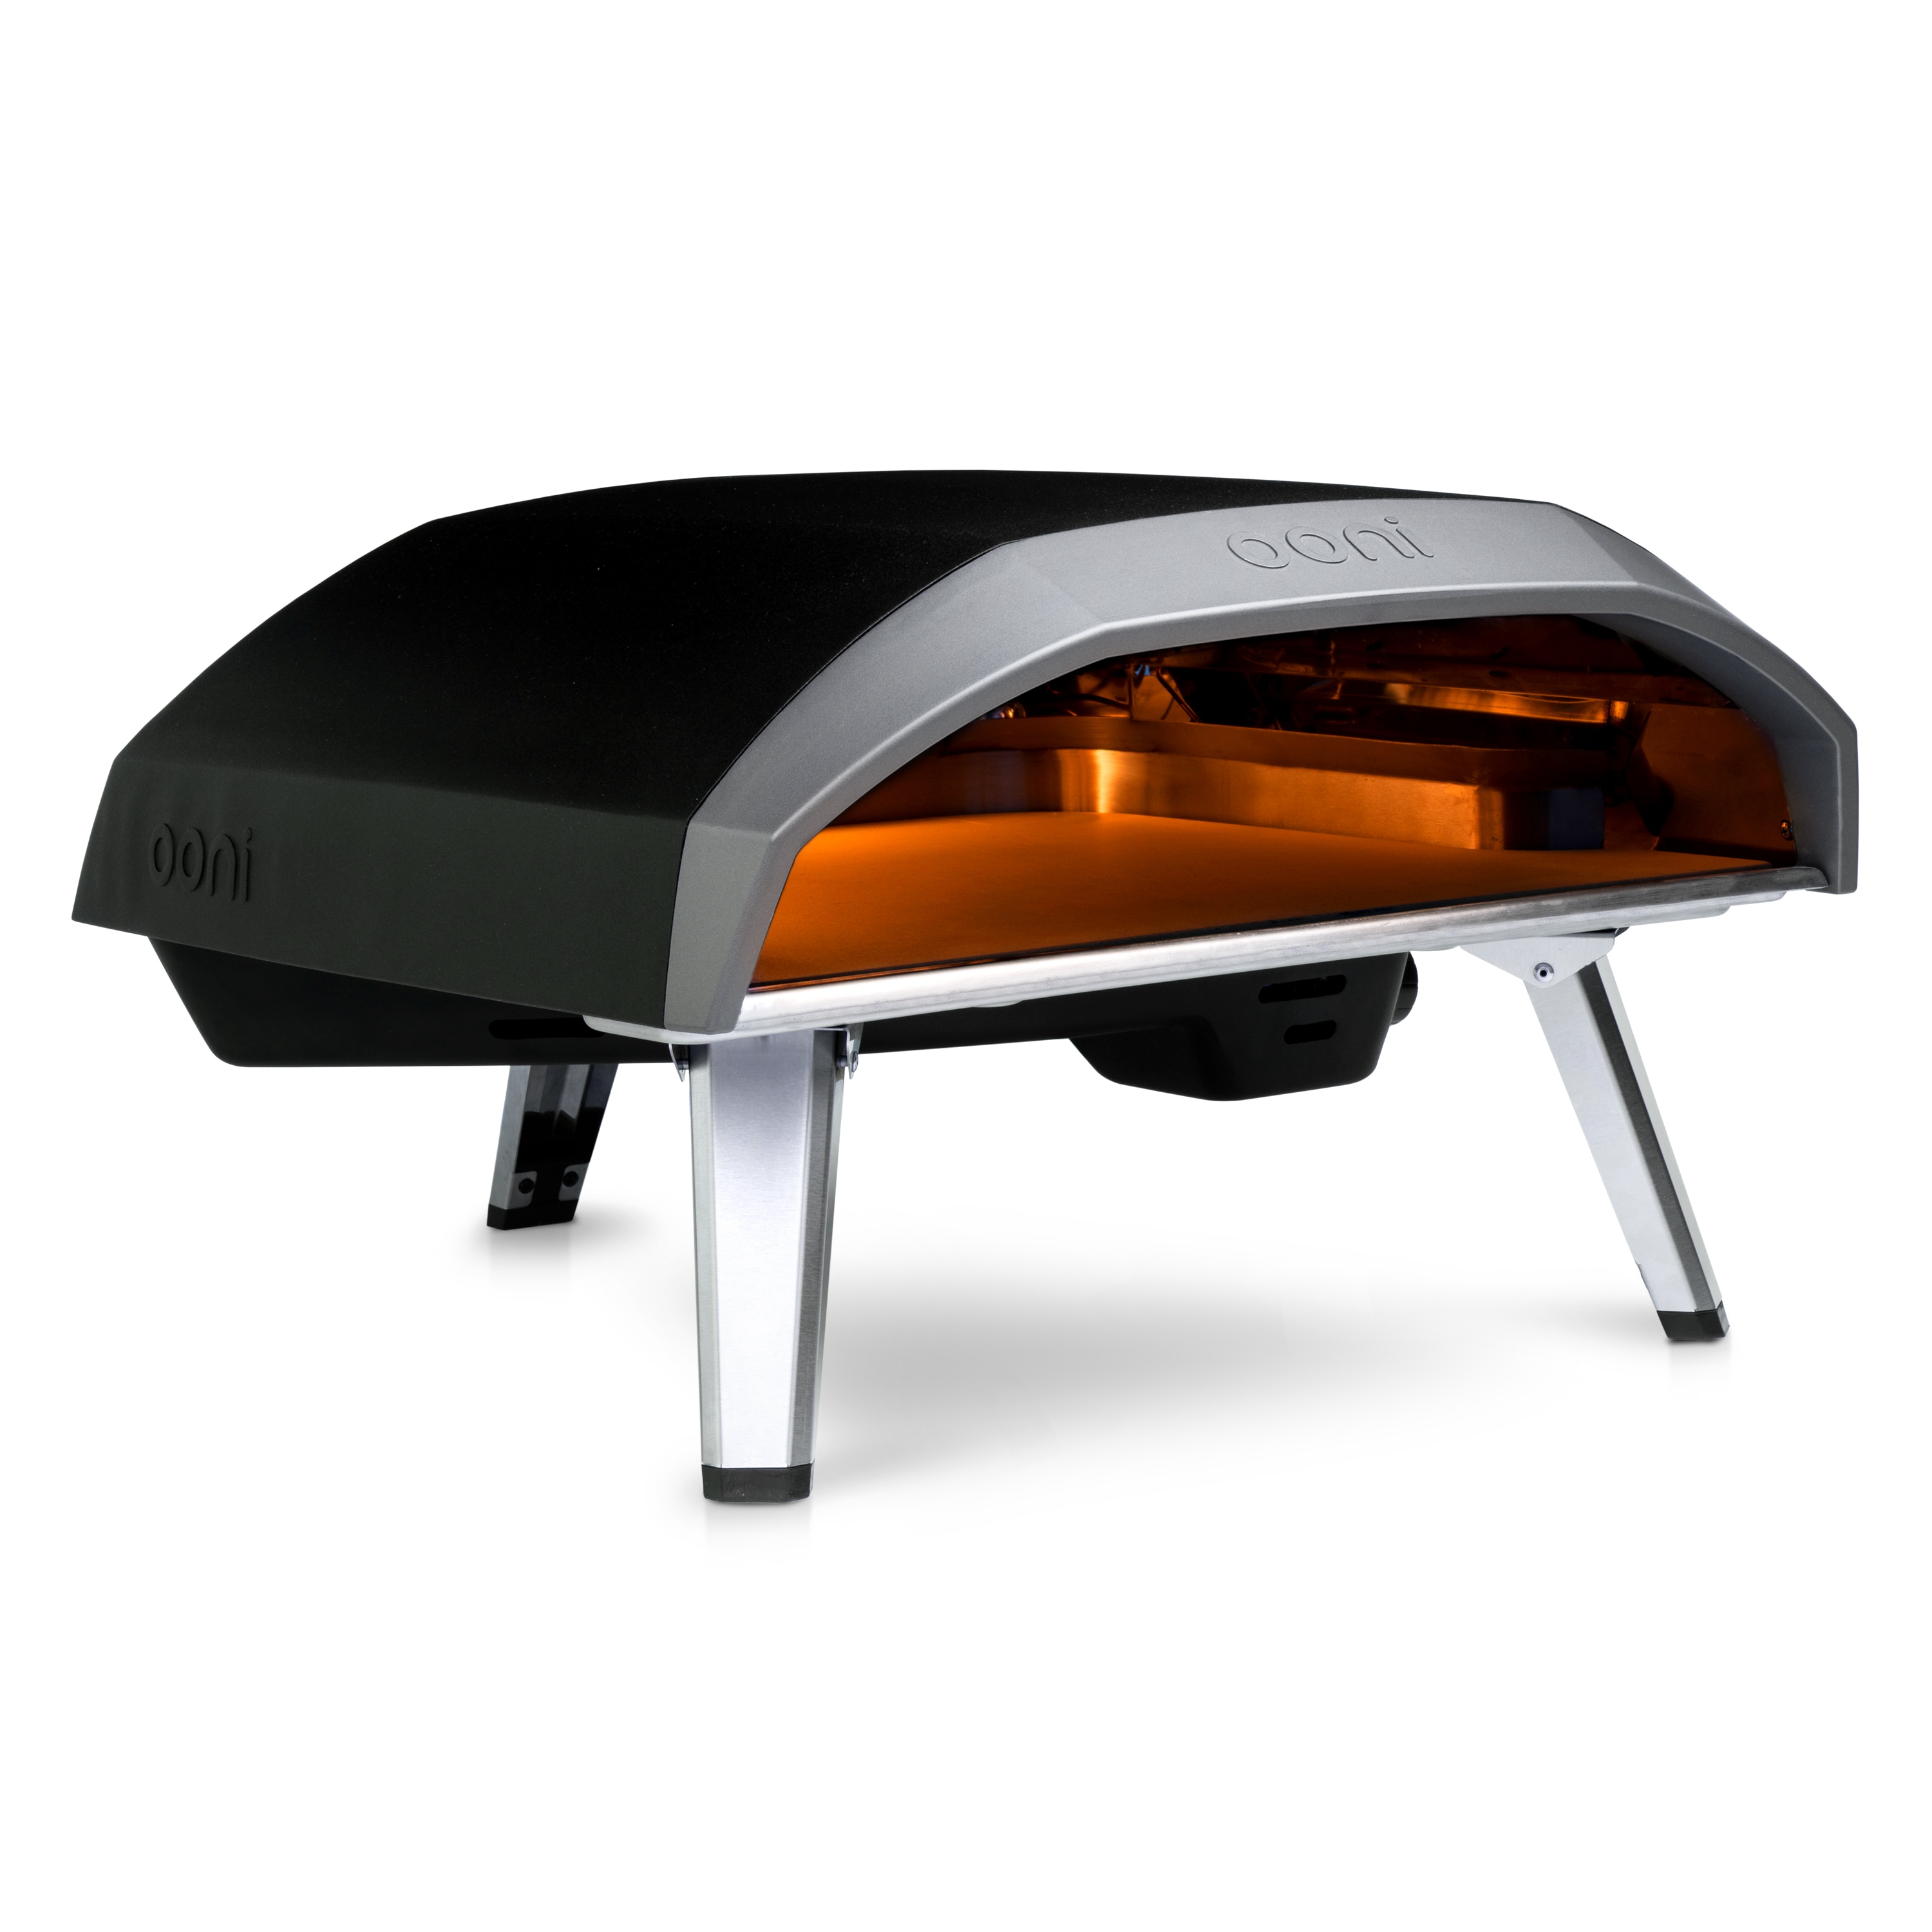 Ooni Pizza Oven Range at Heat & Grill